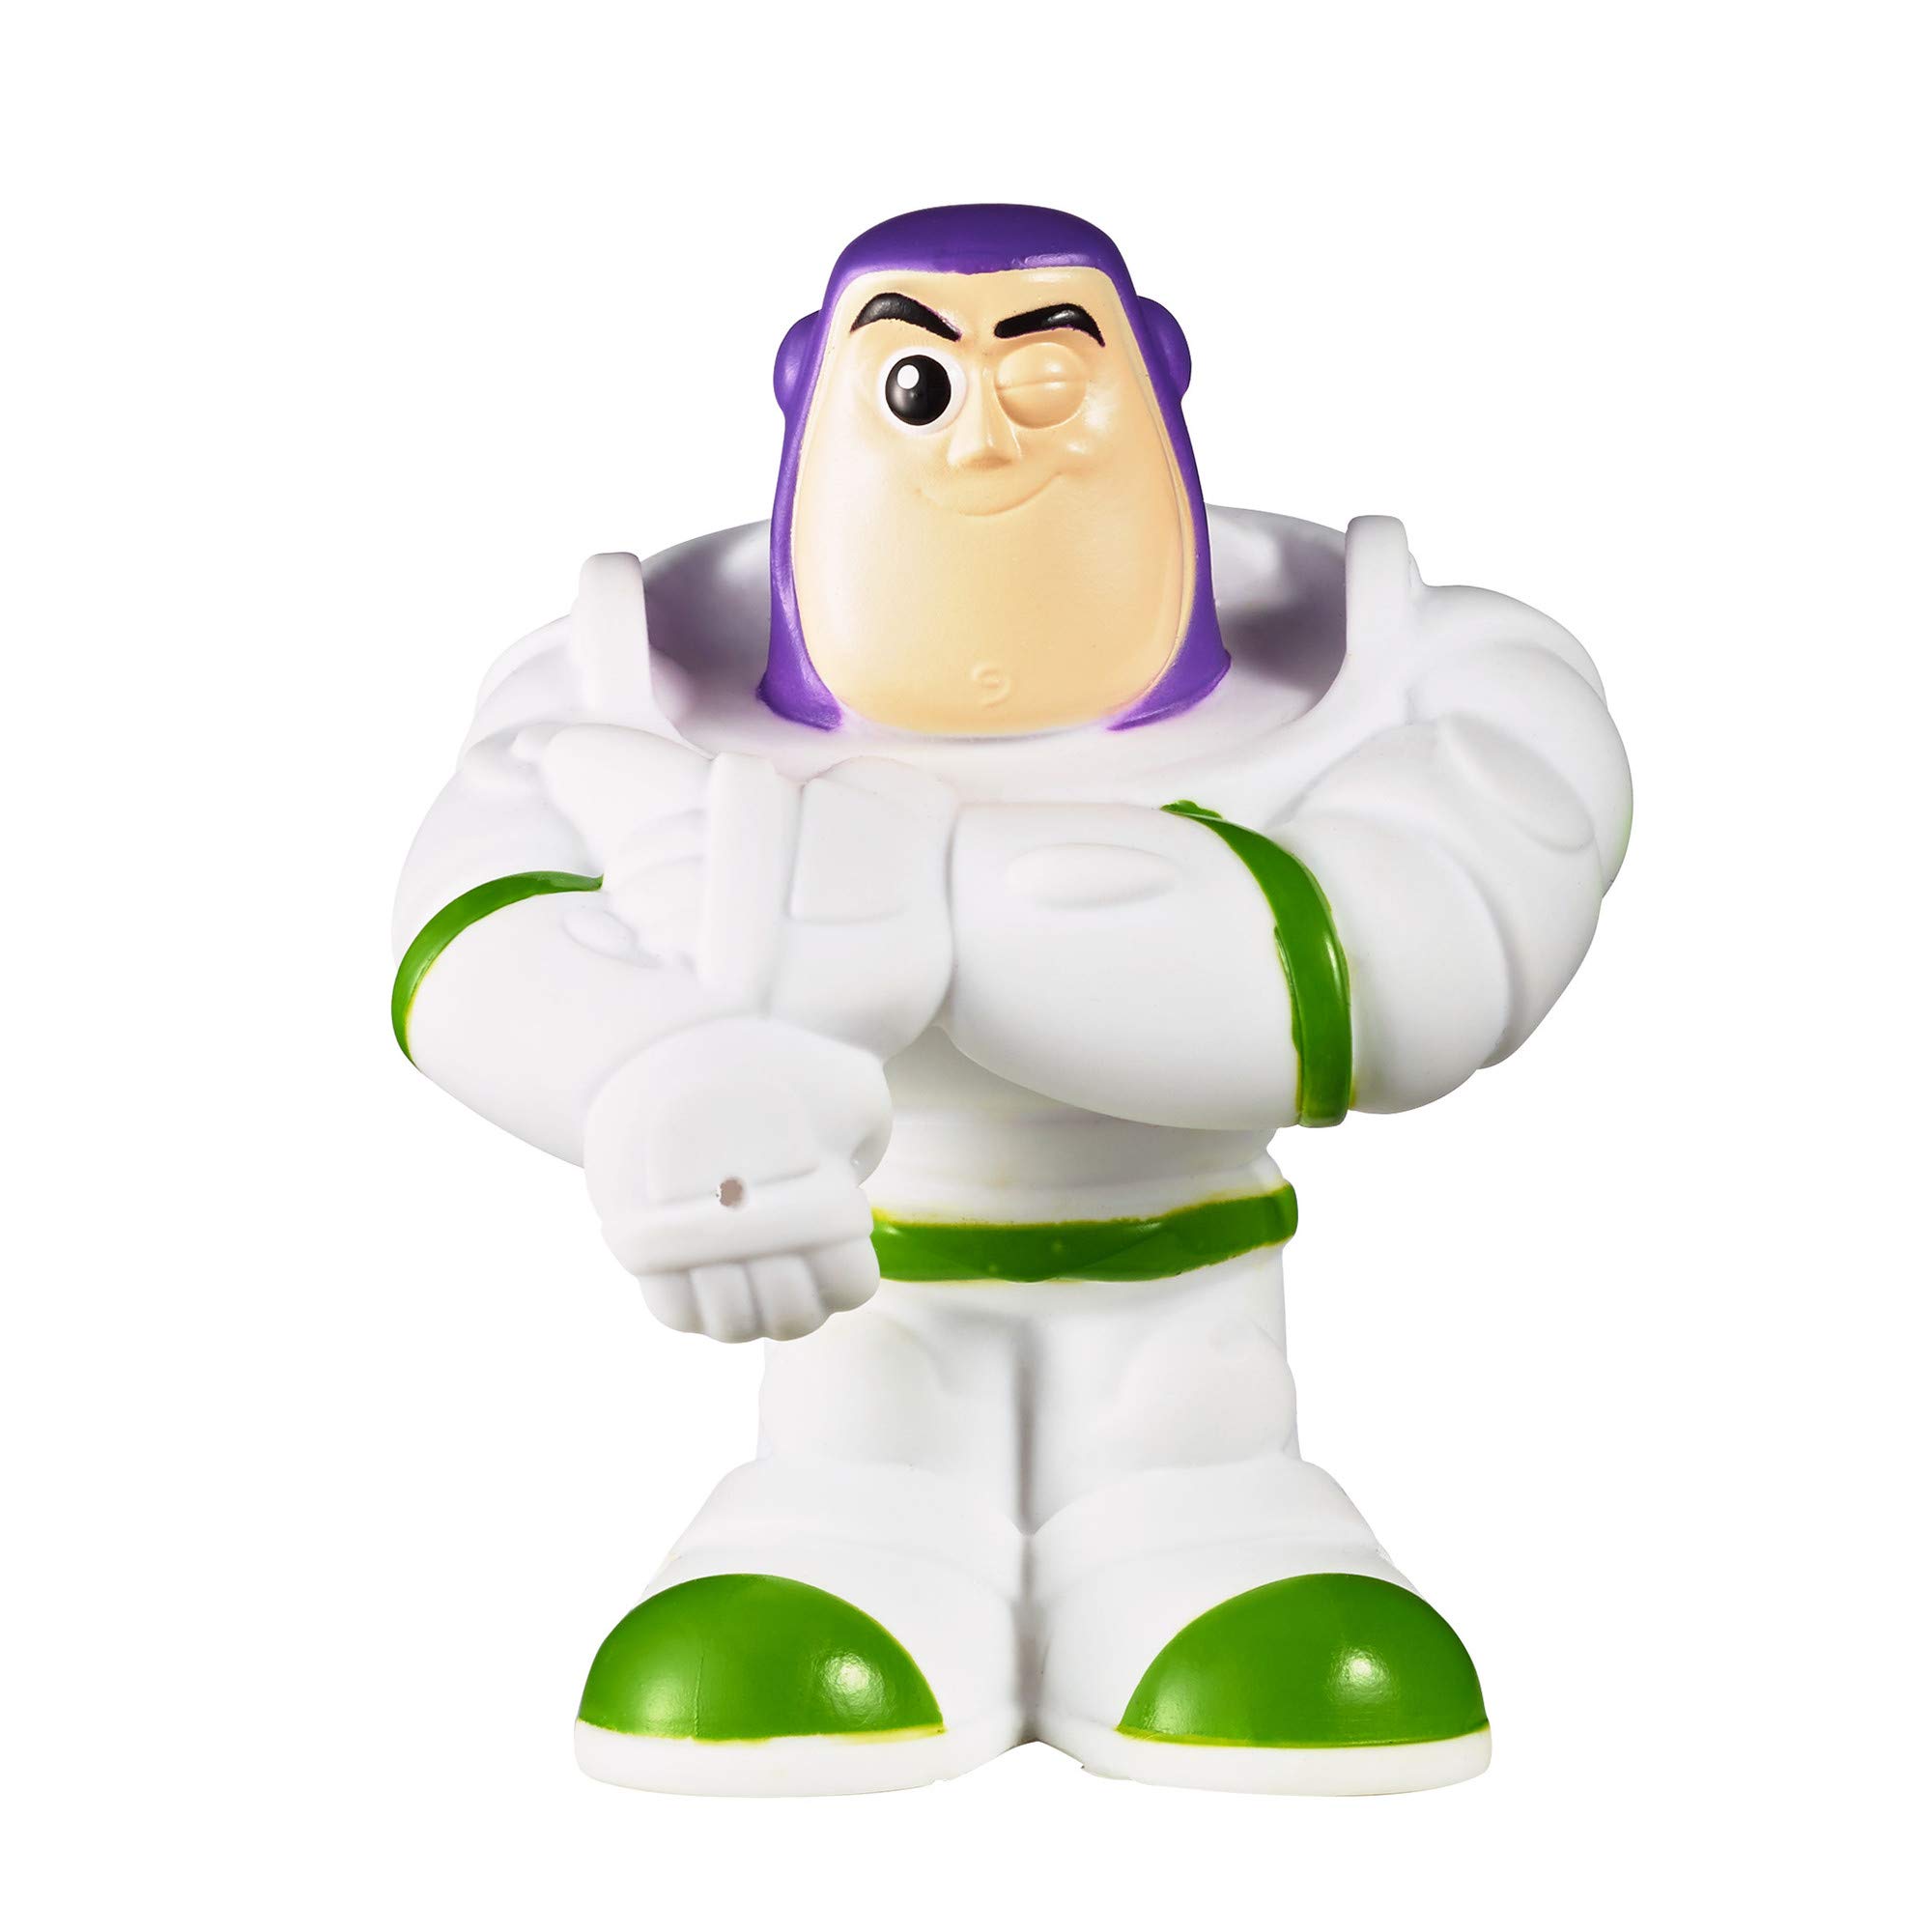 The First Years Disney/Pixar Toy Story Bath Toys - Buzz Lightyear, Alien, and Planet - Squirting Kids Bath Toys for Sensory Play - 6-18 Months - 3 Count